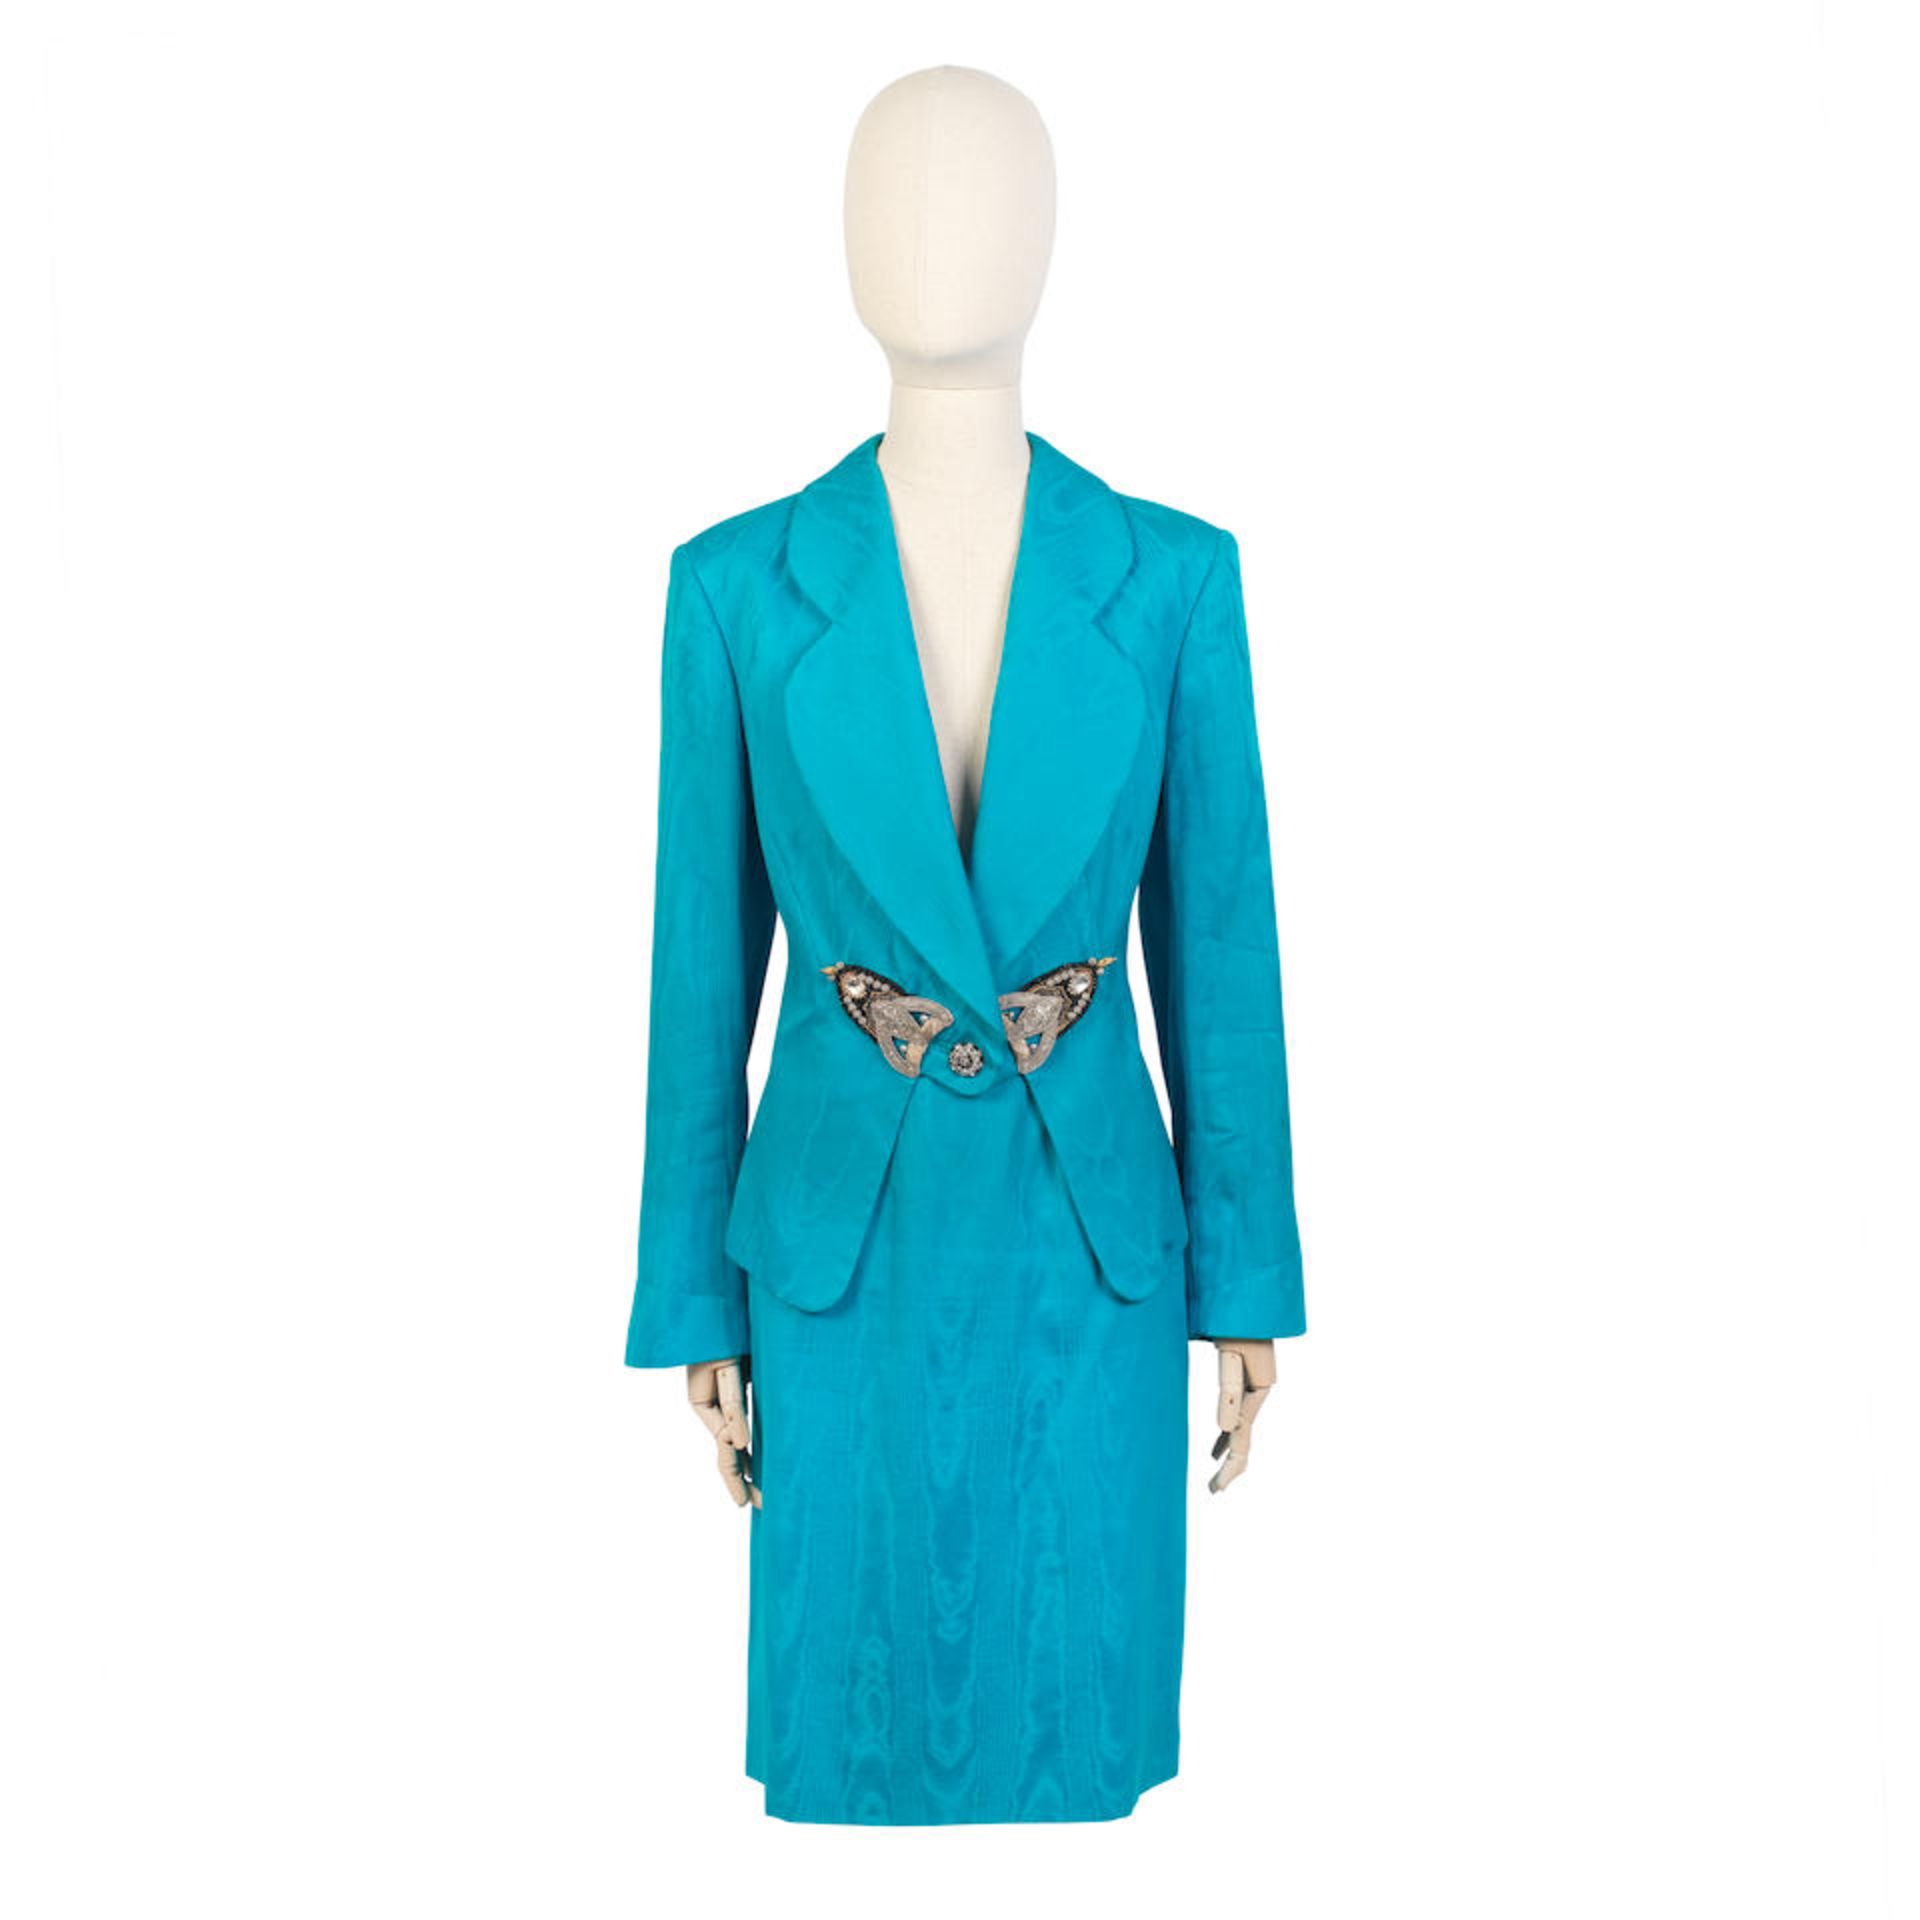 Christian Dior: a Turquoise Moiré Skirt Suit 1990s Demi Couture (includes spare button)